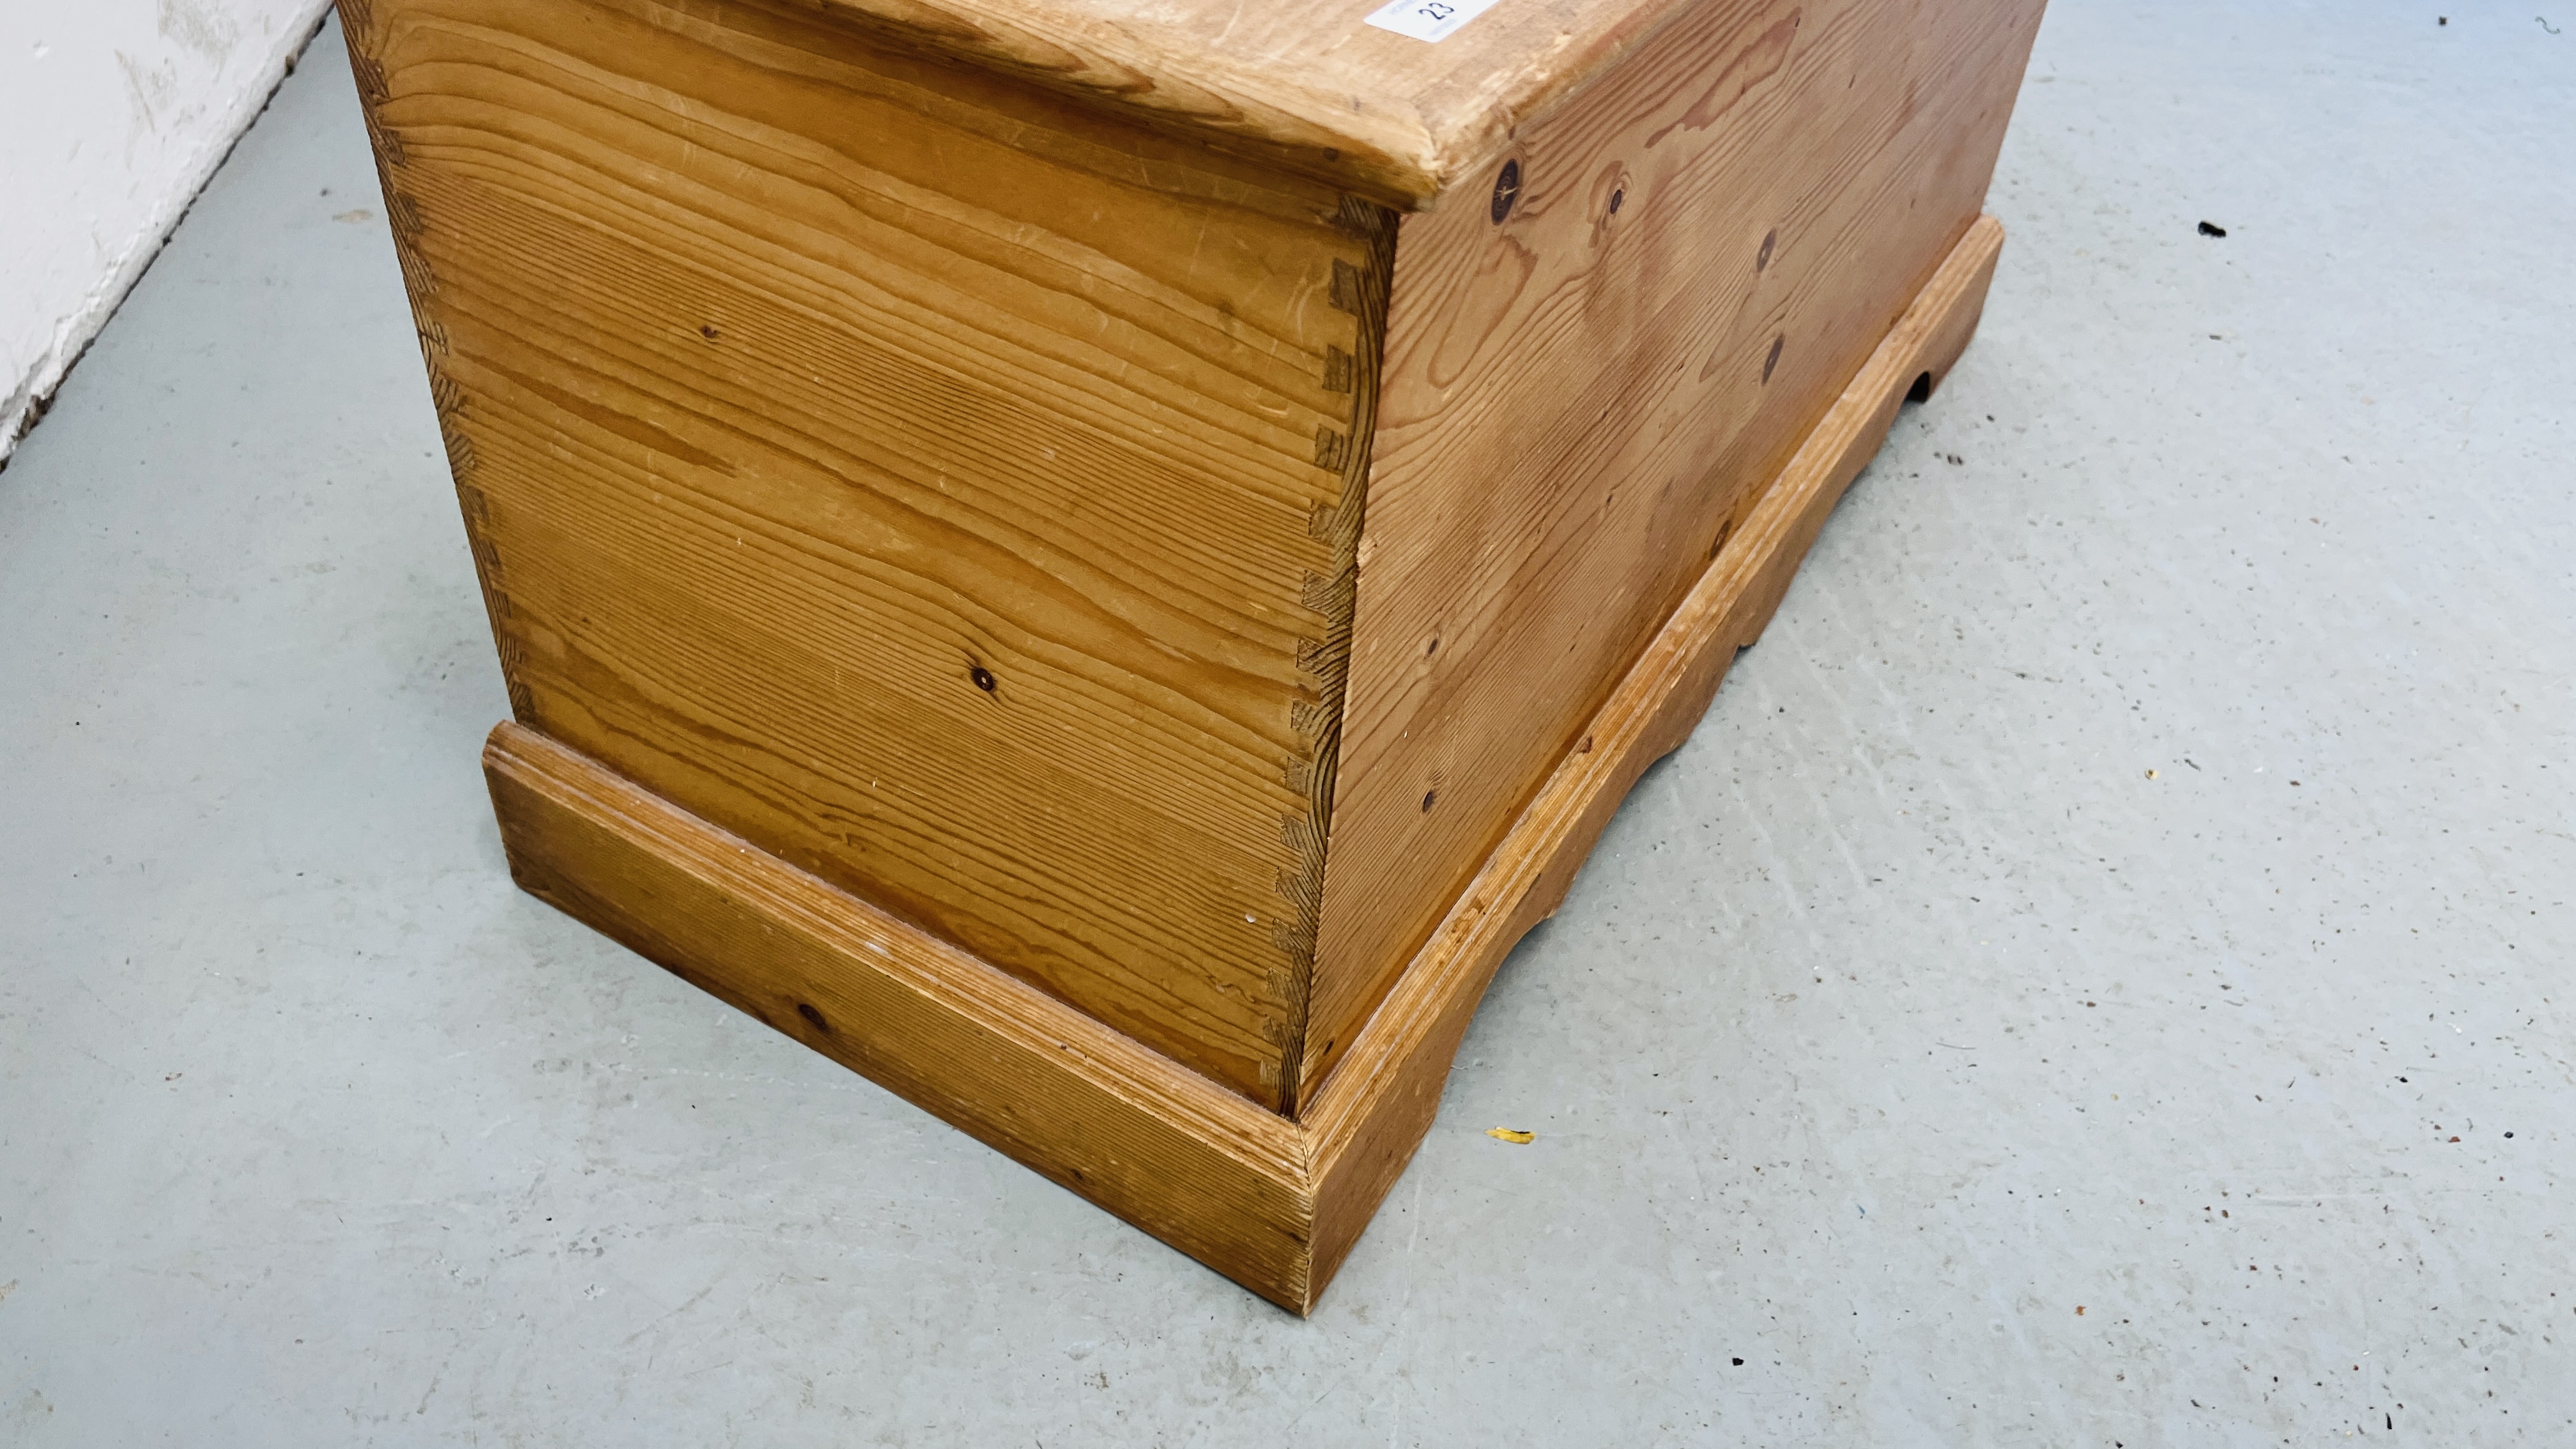 A SOLID PINE BLANKET BOX WIDTH 96CM. DEPTH 42CM. HEIGHT 49CM. - Image 5 of 6